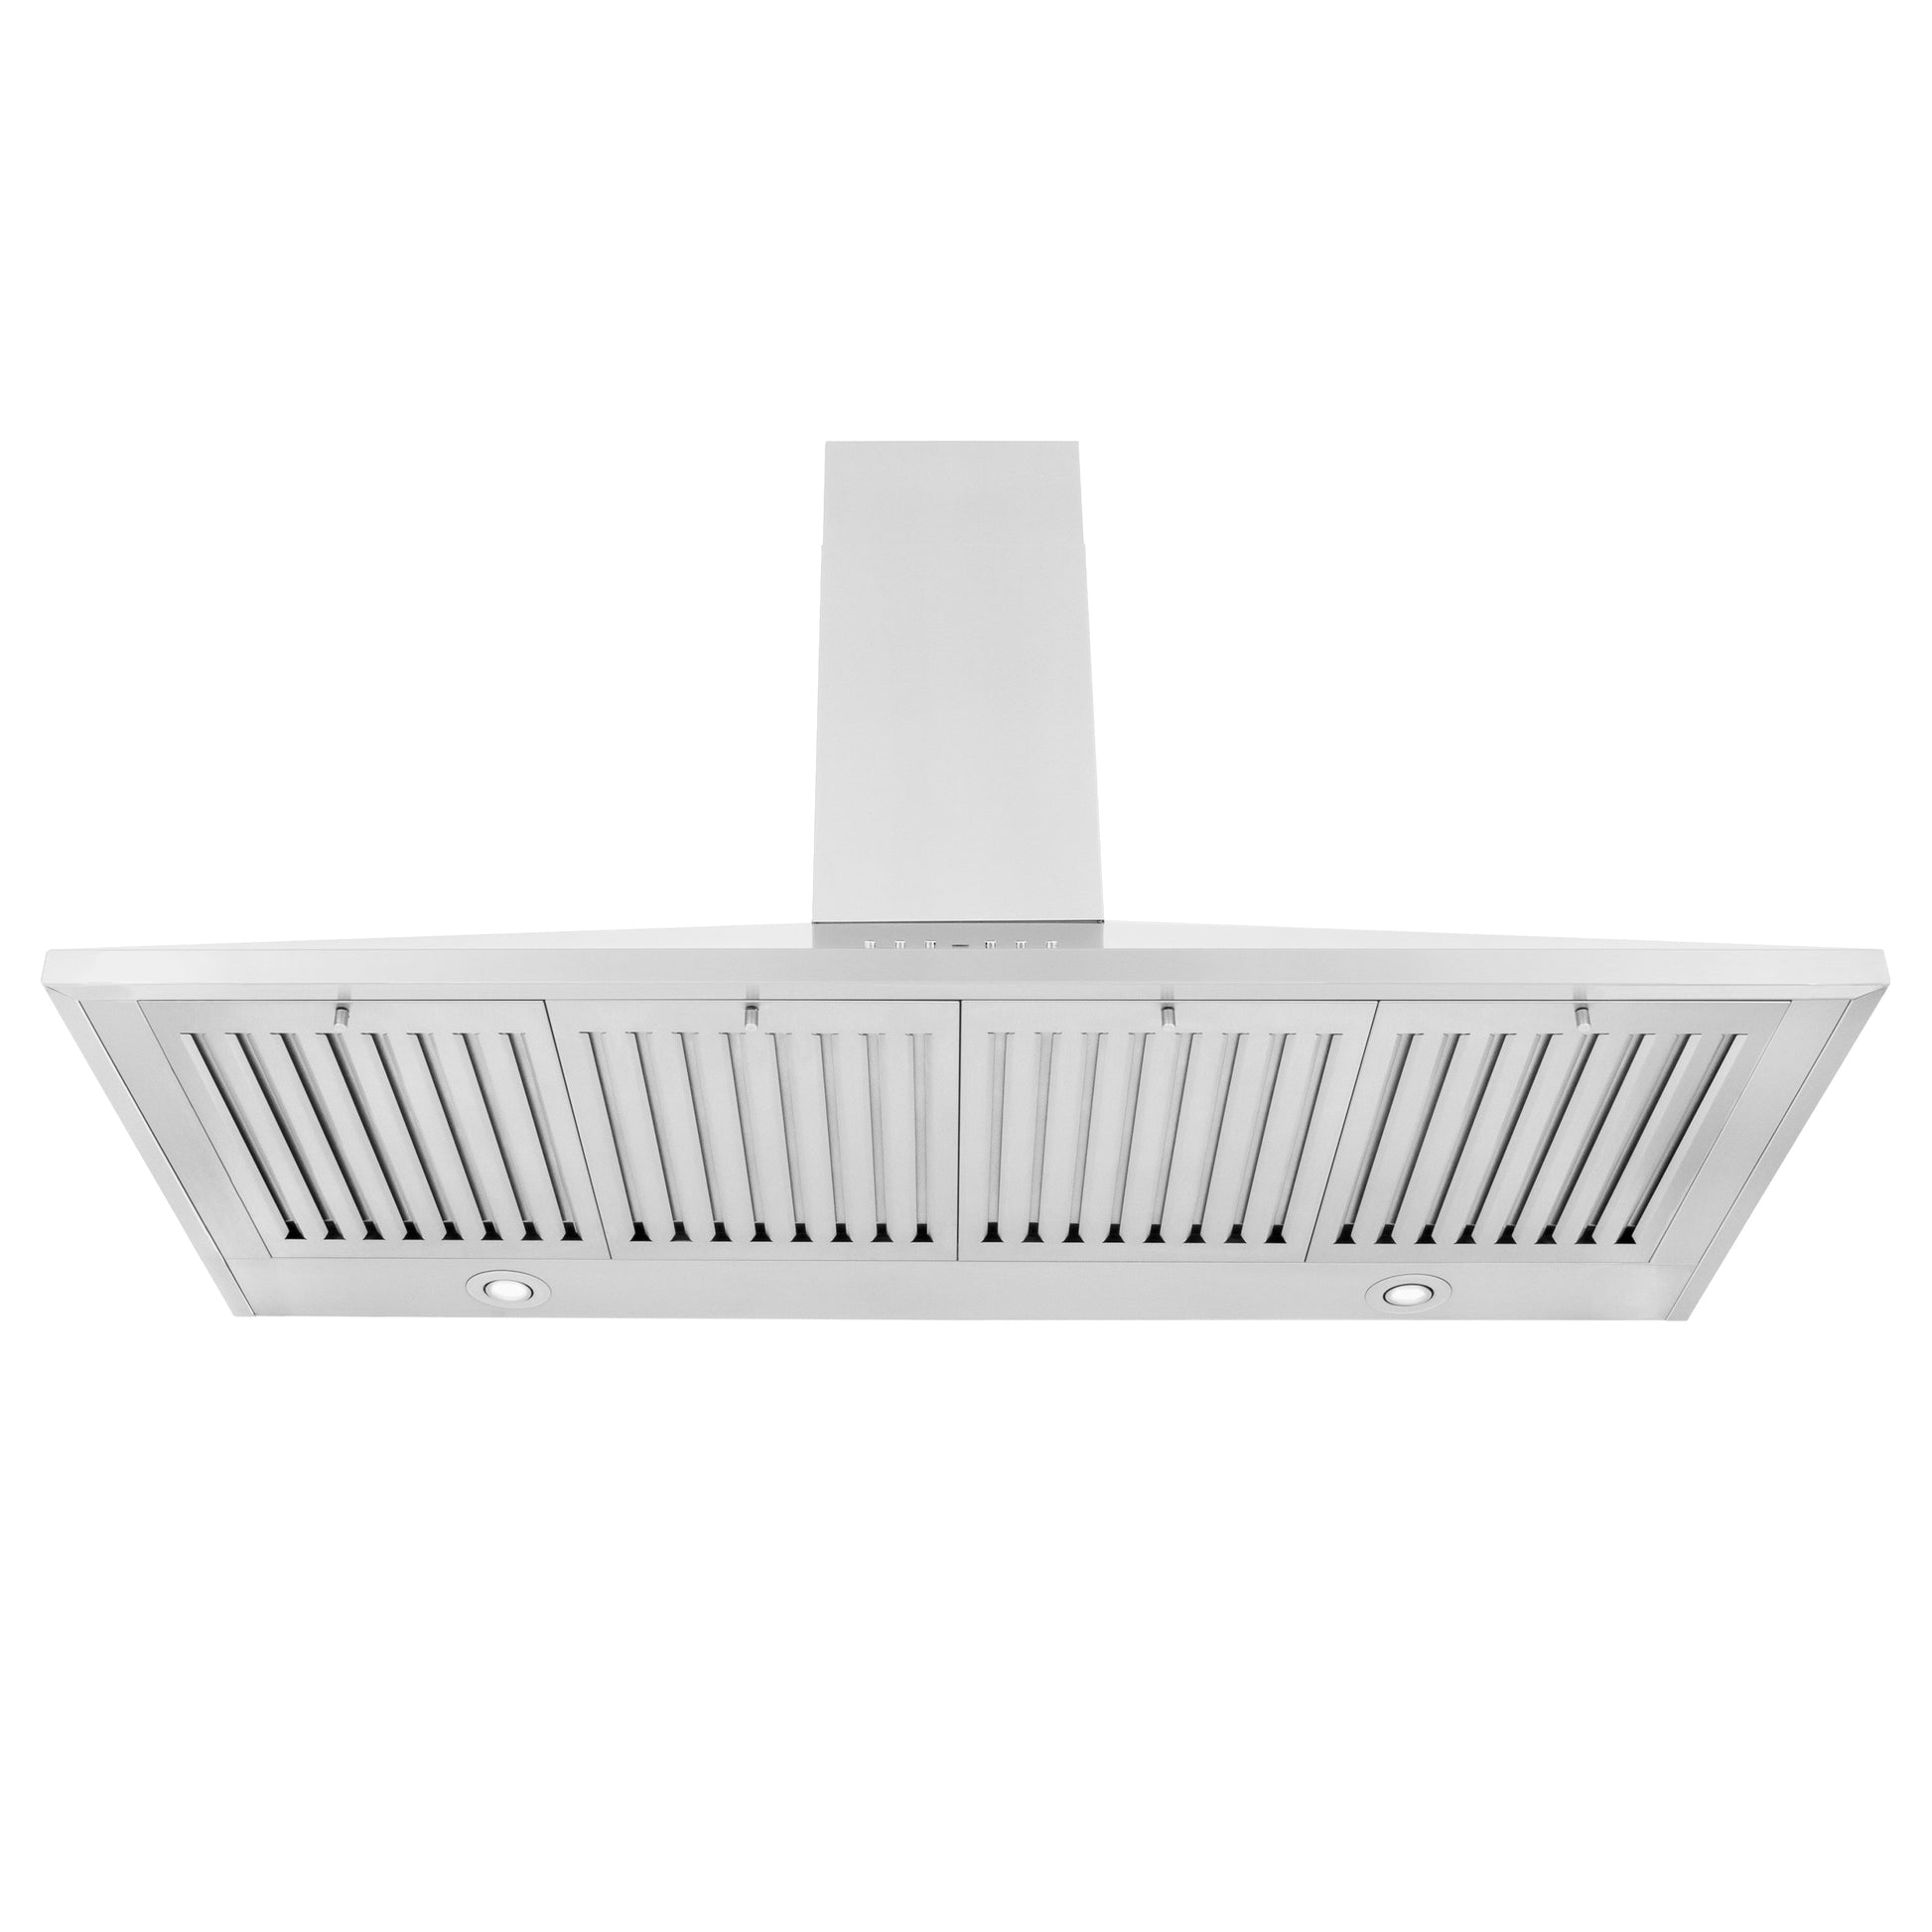 ZLINE Convertible Vent Wall Mount Range Hood in Stainless Steel (KL2) 48" front under showing LED lighting and quad baffle filters.